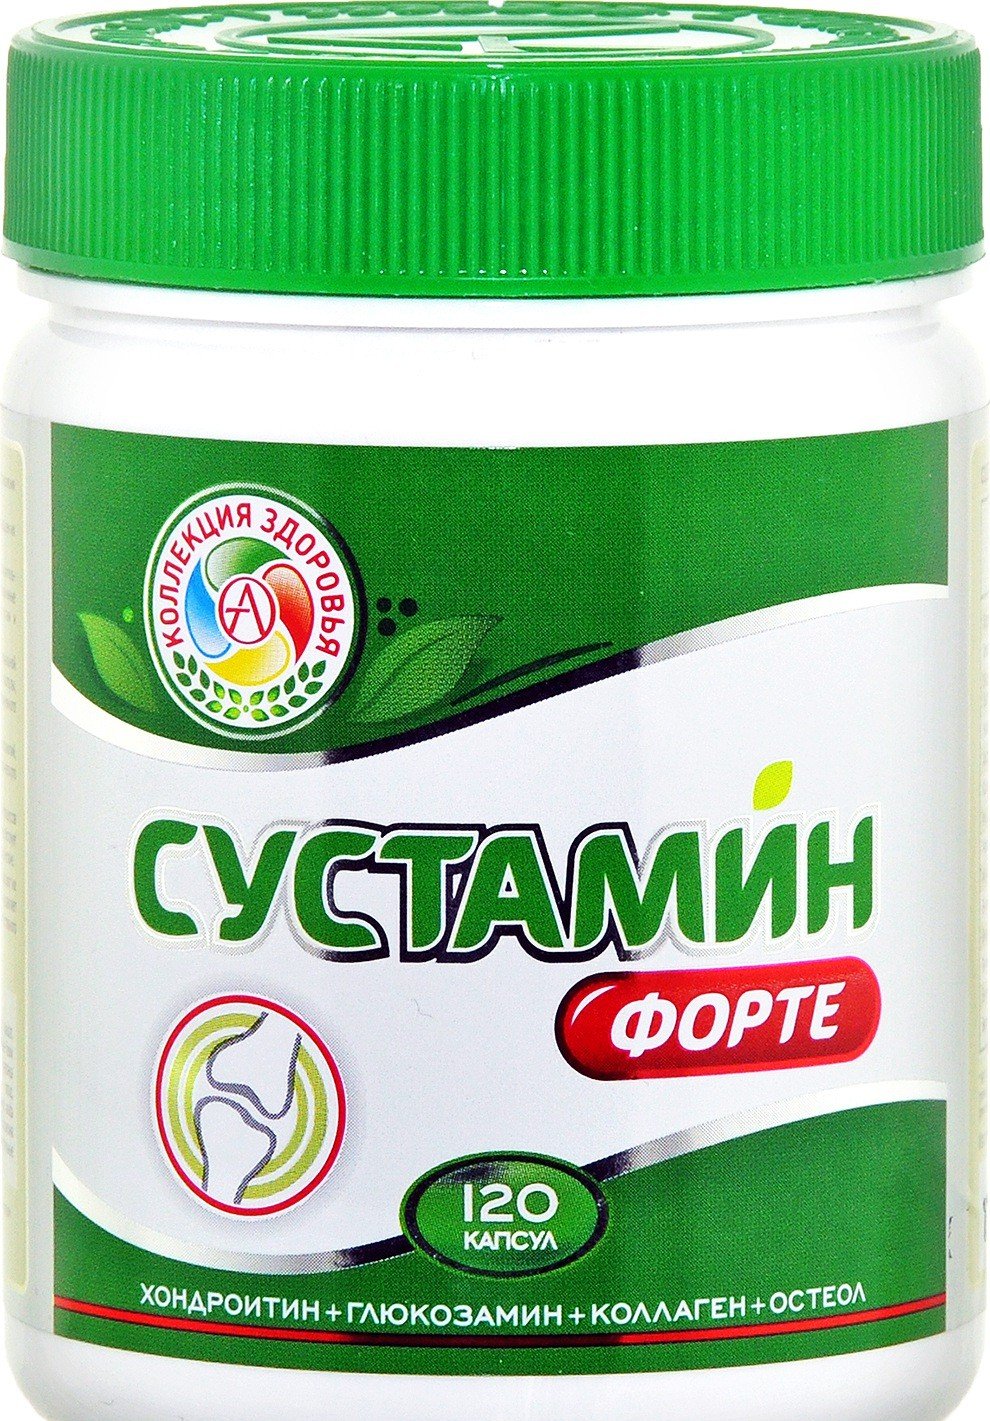 Сустамин Форте, 120 pcs, Academy-T. Glucosamine Chondroitin. General Health Ligament and Joint strengthening 